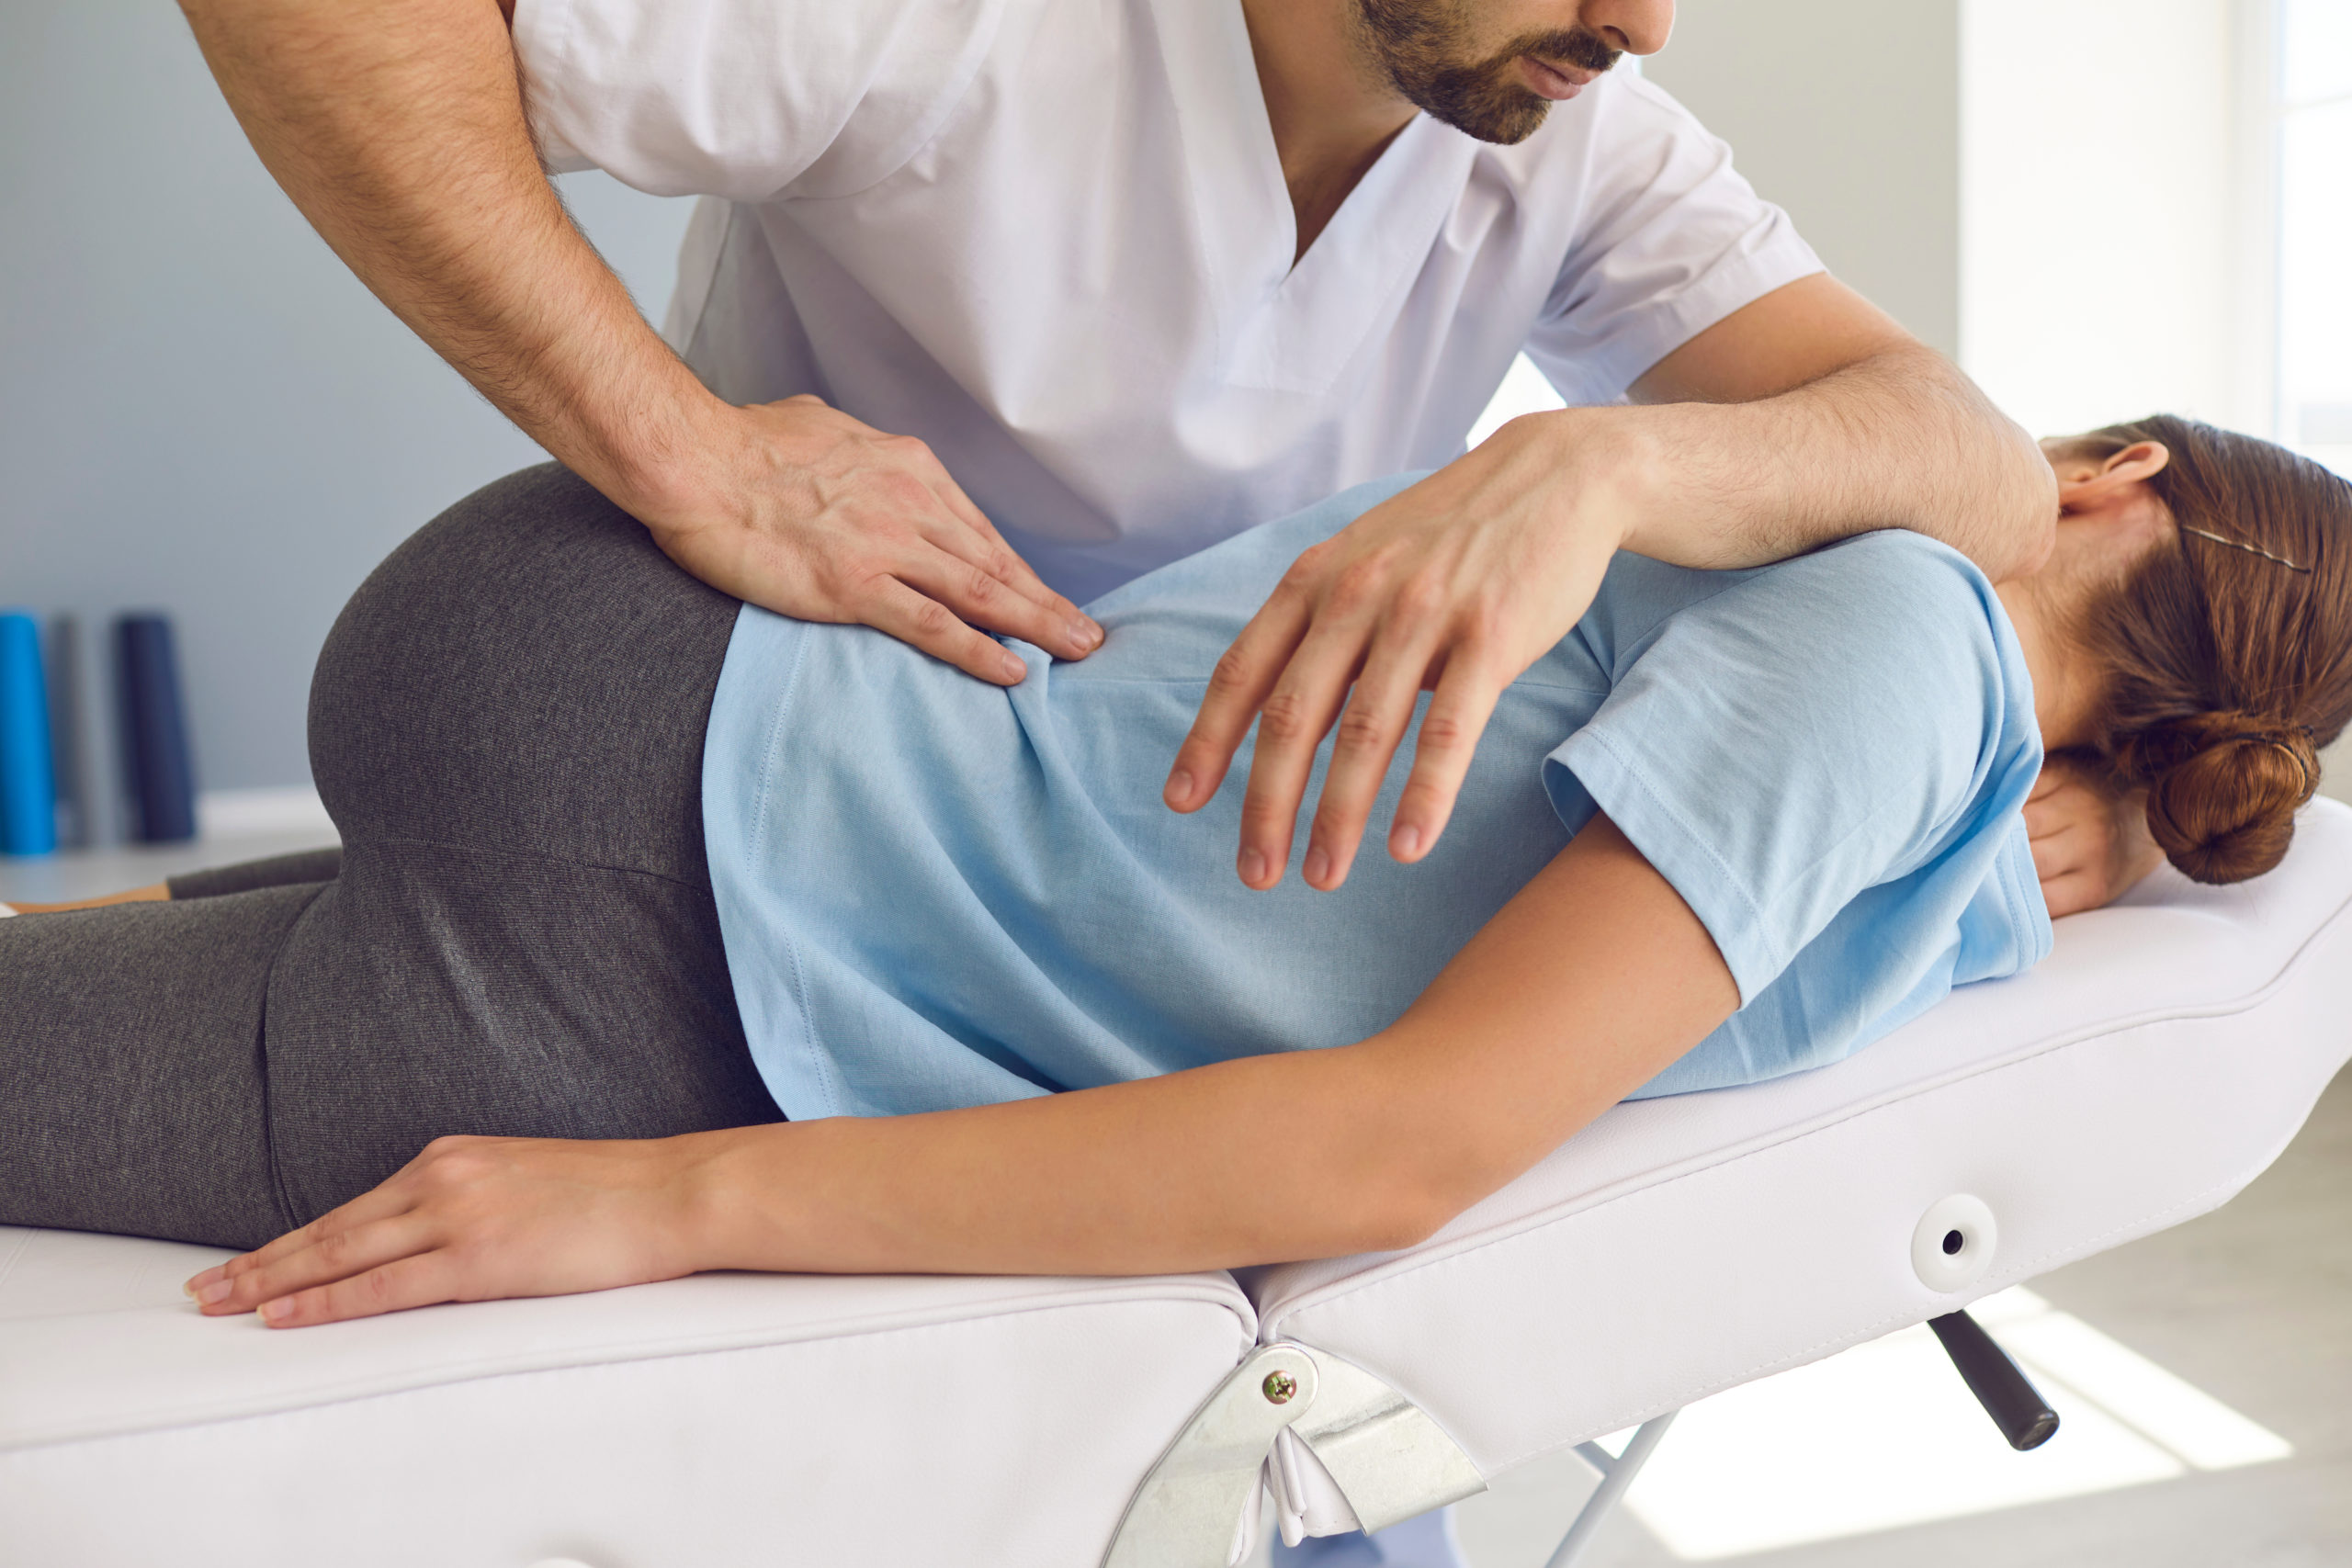 A person receiving a chiropractic adjustment while lying on their side on a white cushioned table. The chiropractor, dressed in a white shirt, is applying pressure to the person's lower back with one hand and supporting their arm with the other, promoting spinal health through the science of chiropractic.